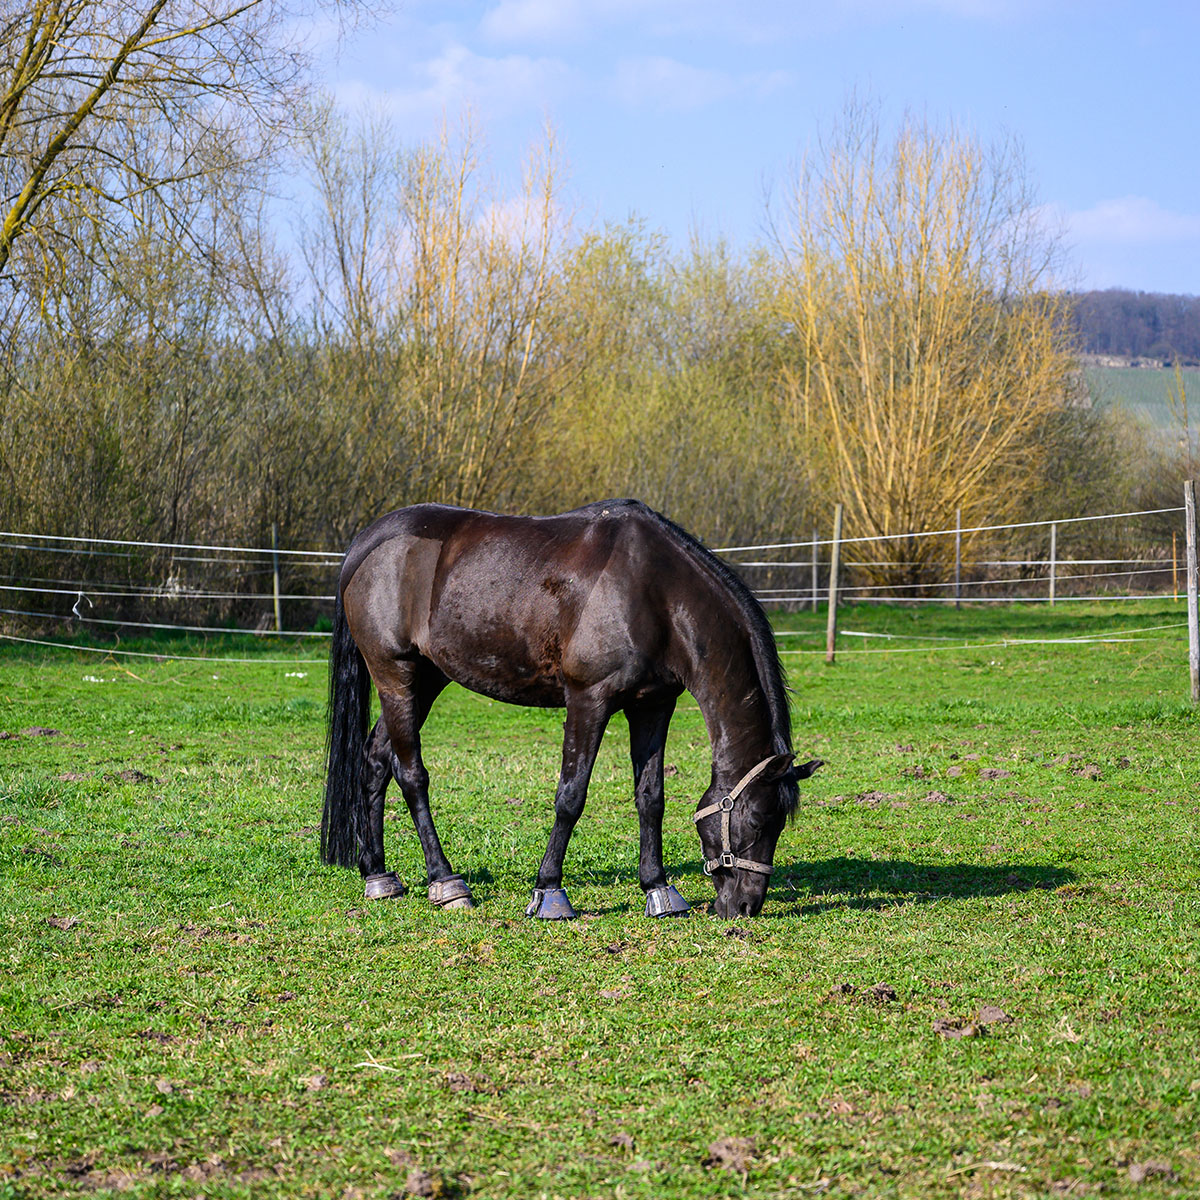 a horse eating grass in a fenced in area